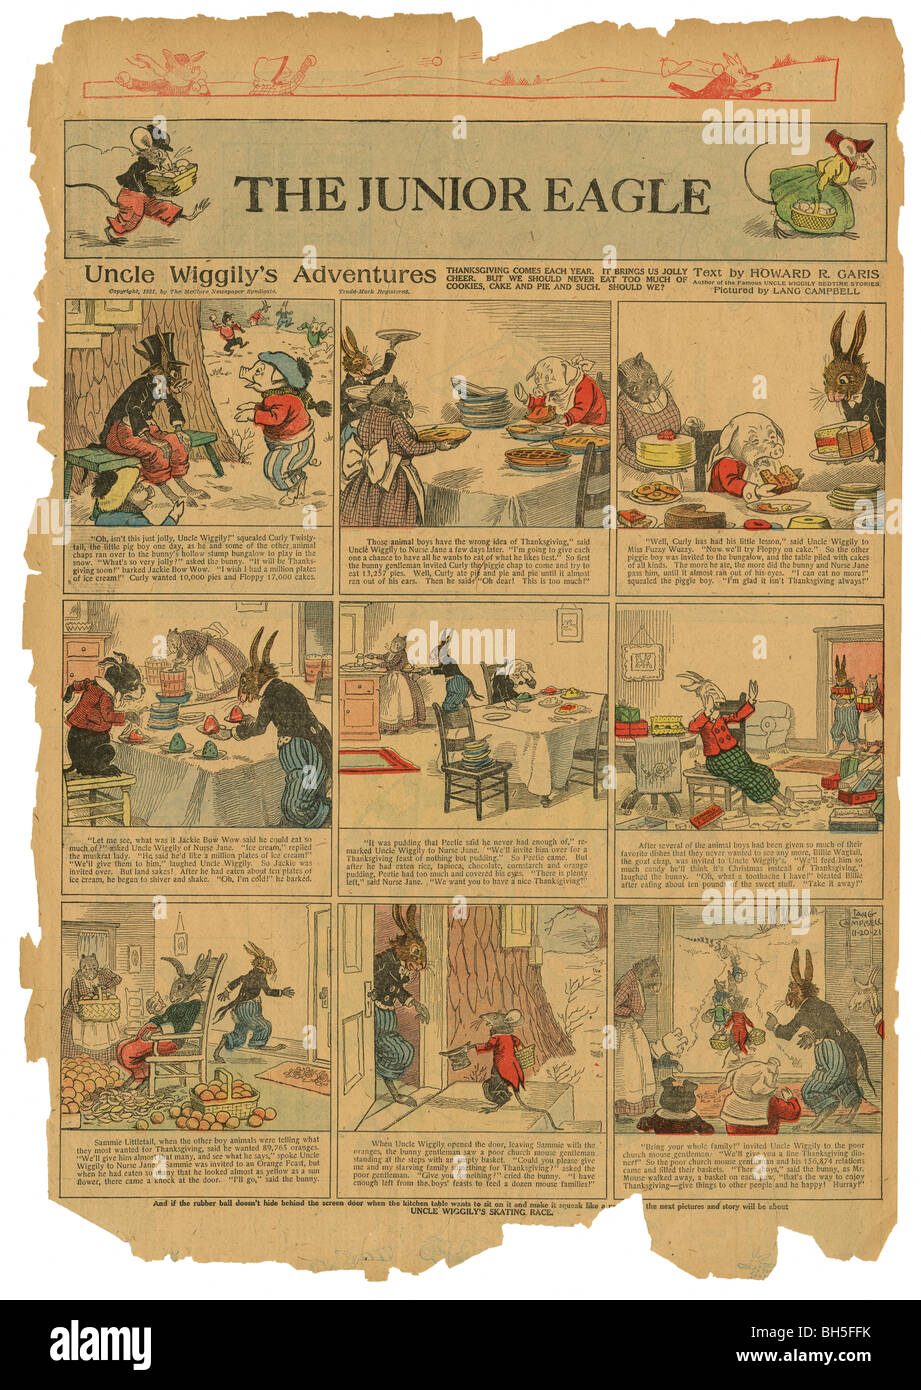 1921 Sunday color comic strip, Uncle Wiggily's Adventures, text by Howard R. Garis, pictures by Lang Campbell. Stock Photo